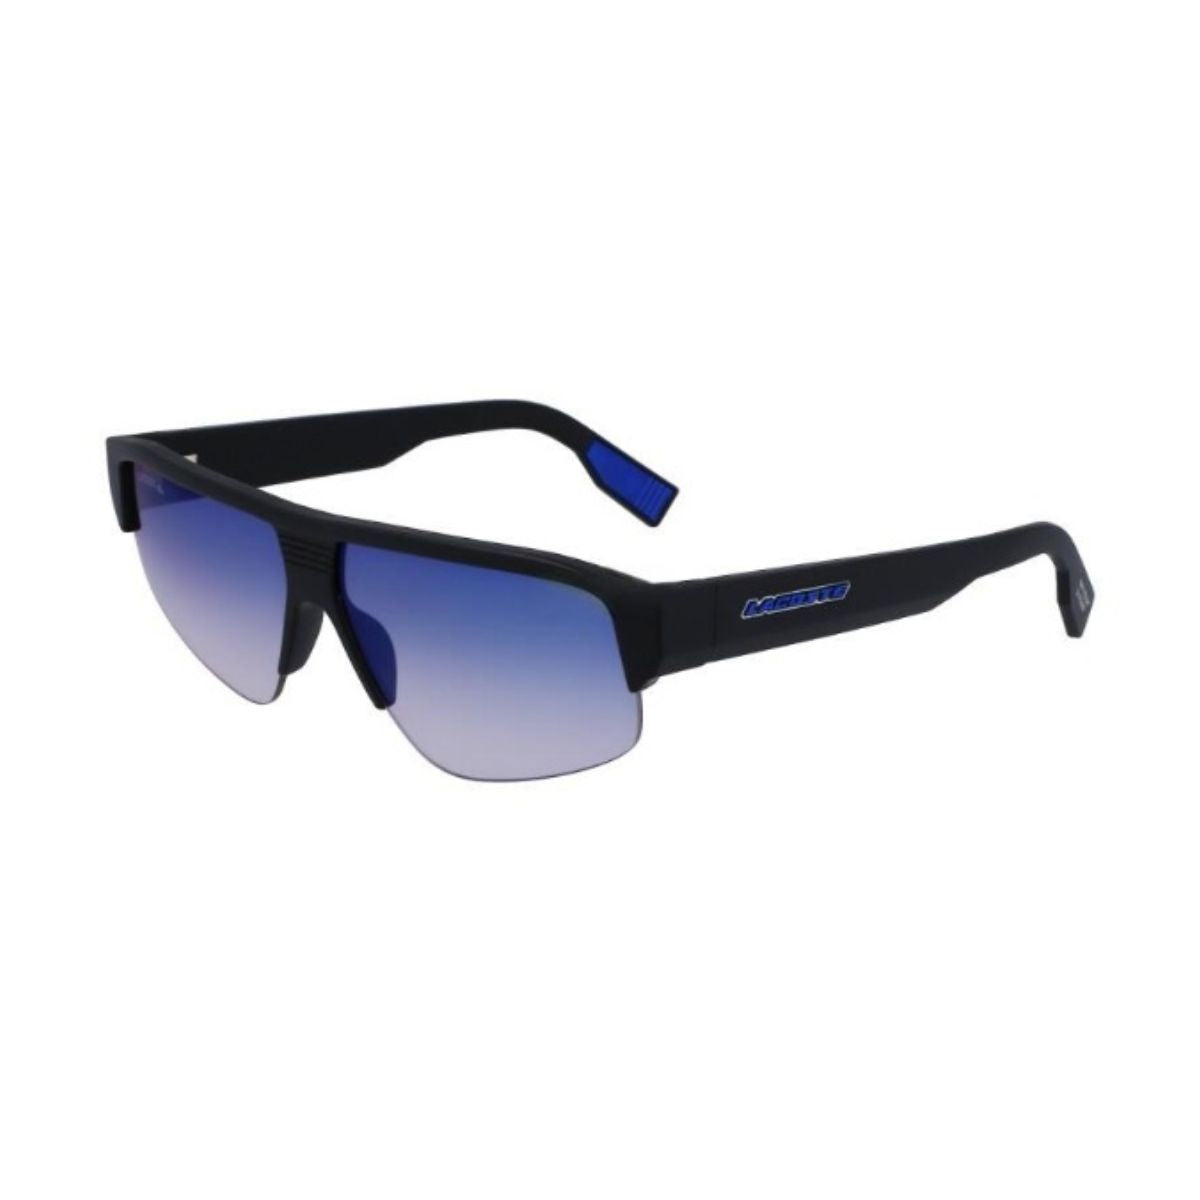 "Lacoste 6003S 002 Rectangle Sunglass for Women at Optorium: Stylish, UV-protected sunglasses with blue flash mirror lens. Available in black or blue temple color. Perfect for men and women, made with polycarbonate lens and a full frame. Shop now at Optorium."